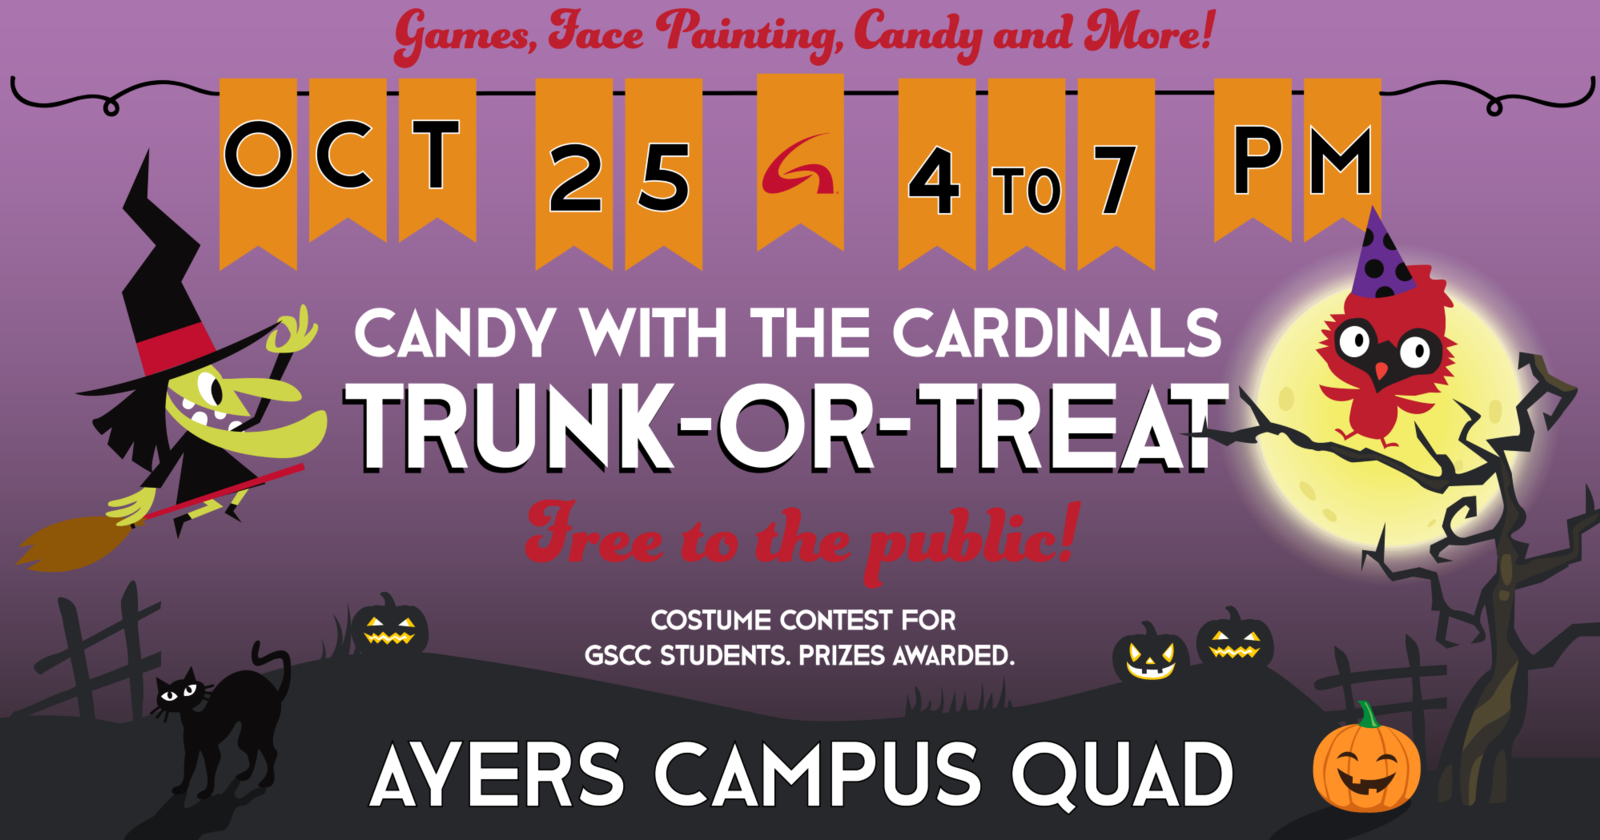 Ayers Campus Trunk-or-Treat event flyer